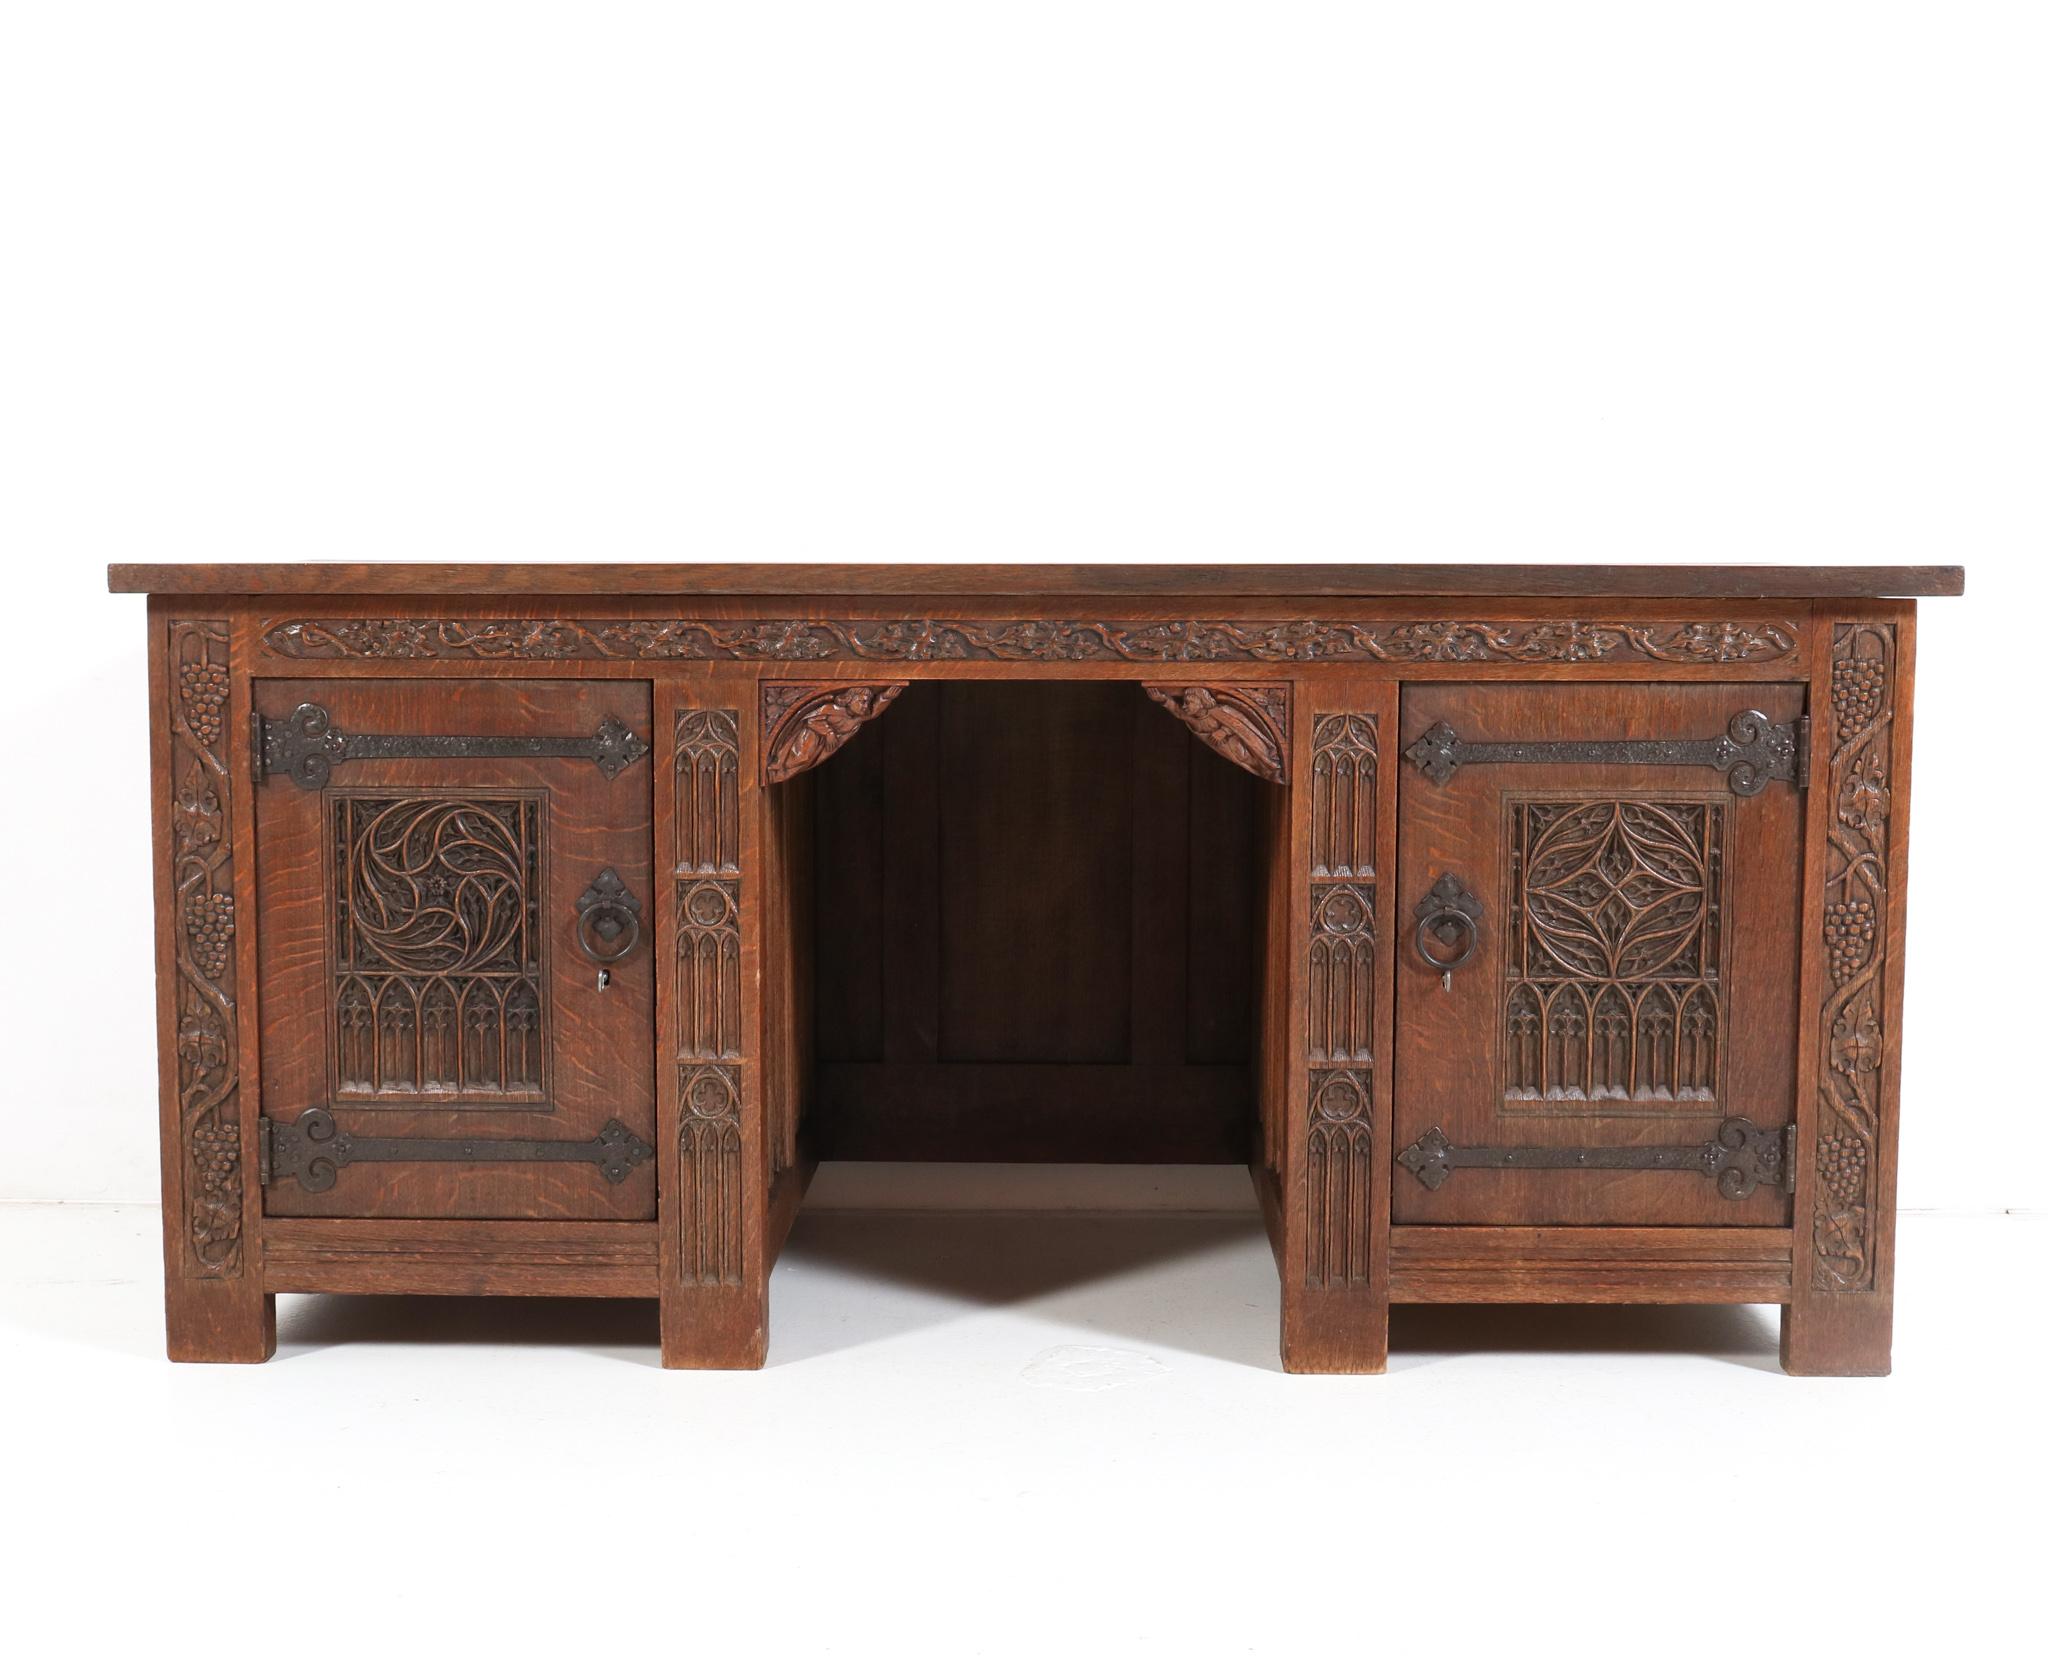 Magnificent and ultra rare  Gothic Revival pedestal desk. 
Striking Dutch design from the 1900s
The craftsmanship of this impressive piece of furniture is outstanding!
Executed in solid oak with original hand-carved Gothic cathedral window-like